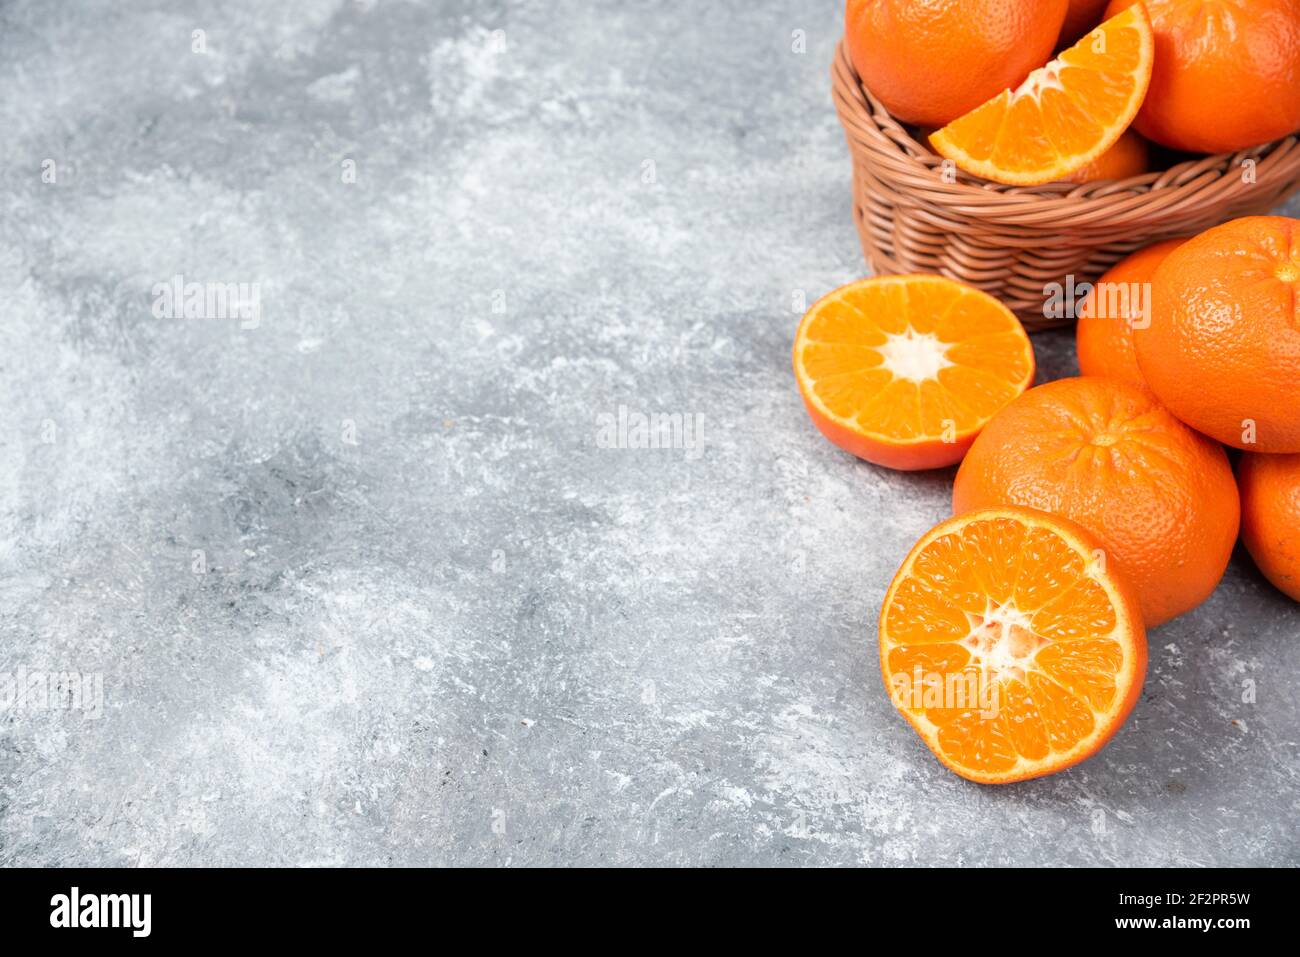 Whole and slice juicy fresh orange fruits in a wicker basket placed Stock Photo